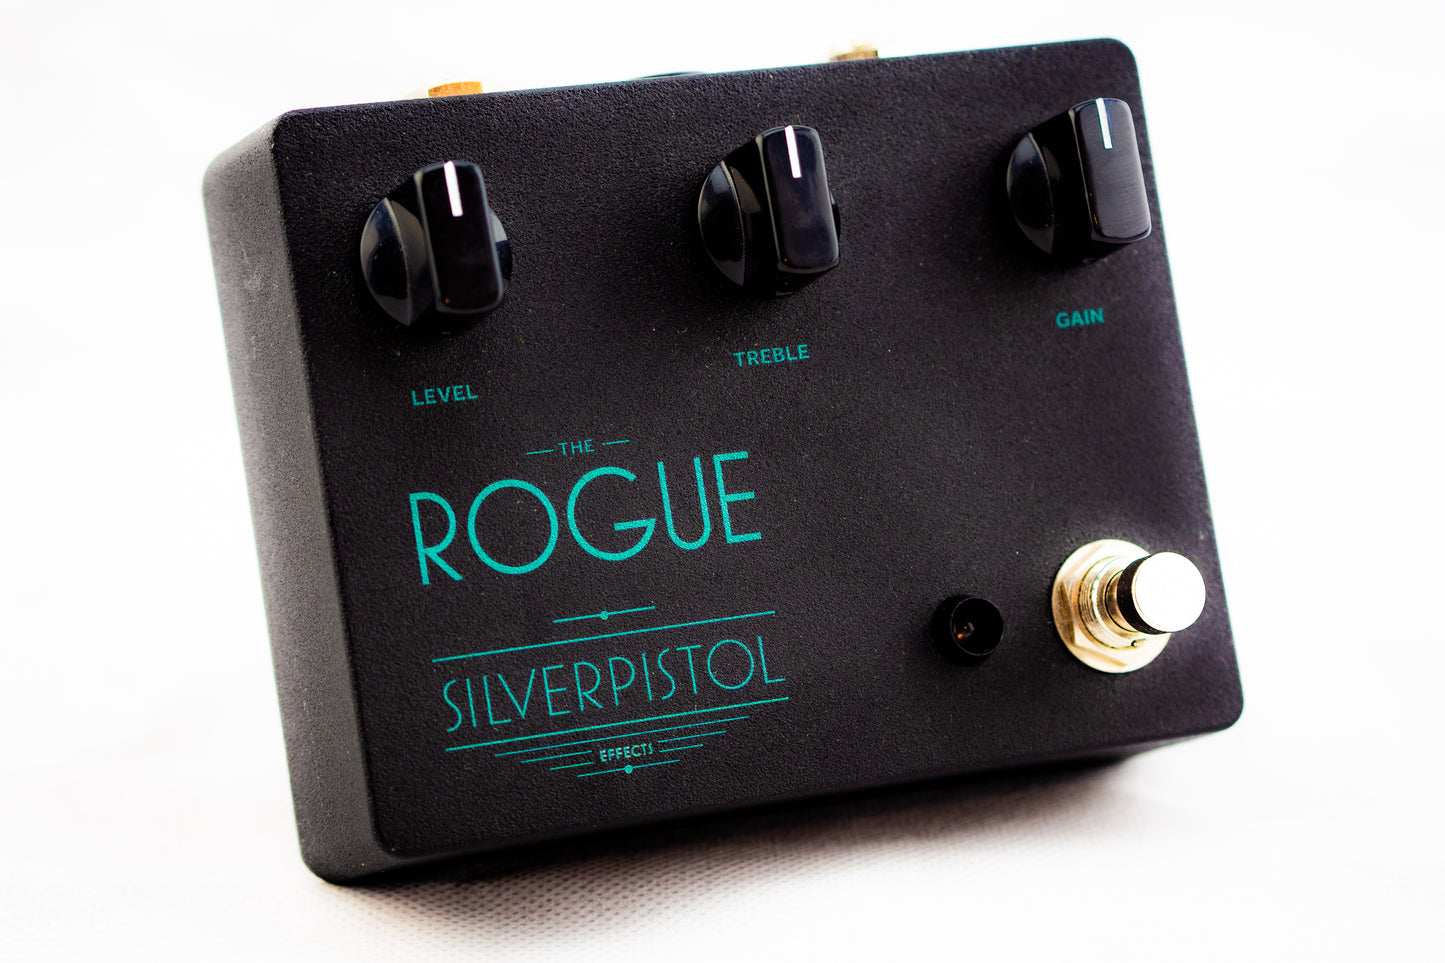 Silverpistol Effects – The Rogue